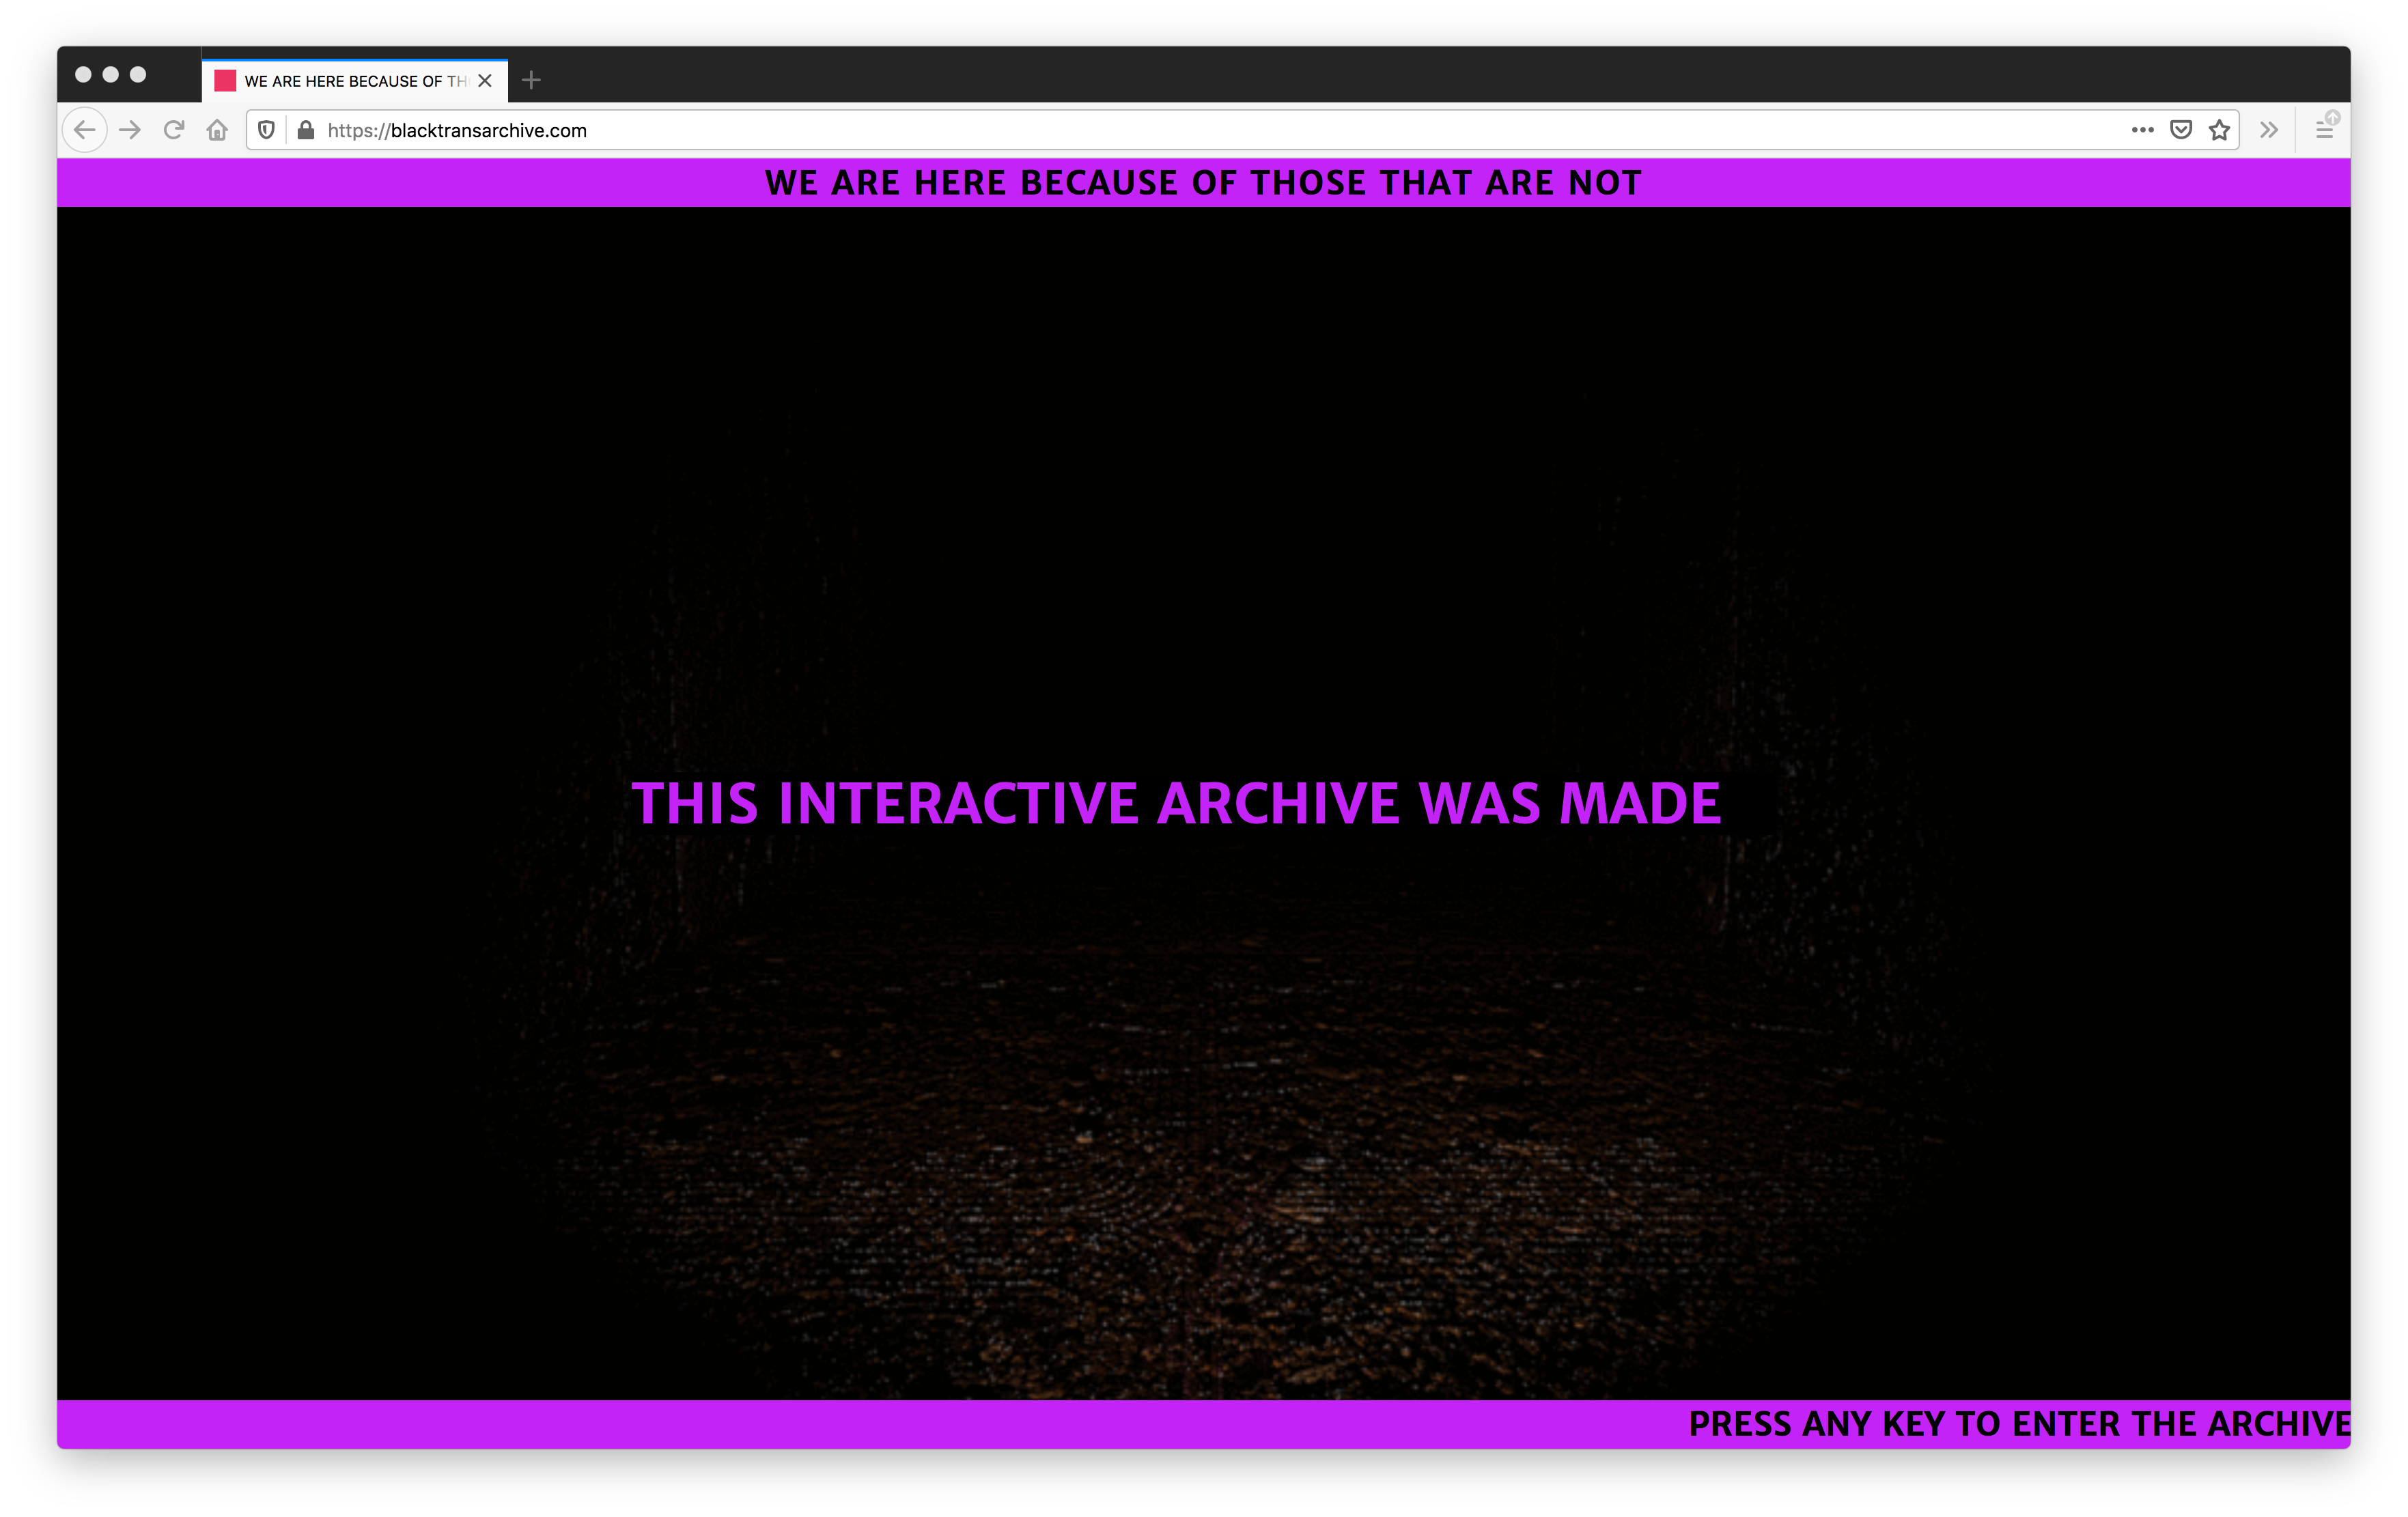 screenshot of a black website with a purple bar on the top and bottom and purple text in the center